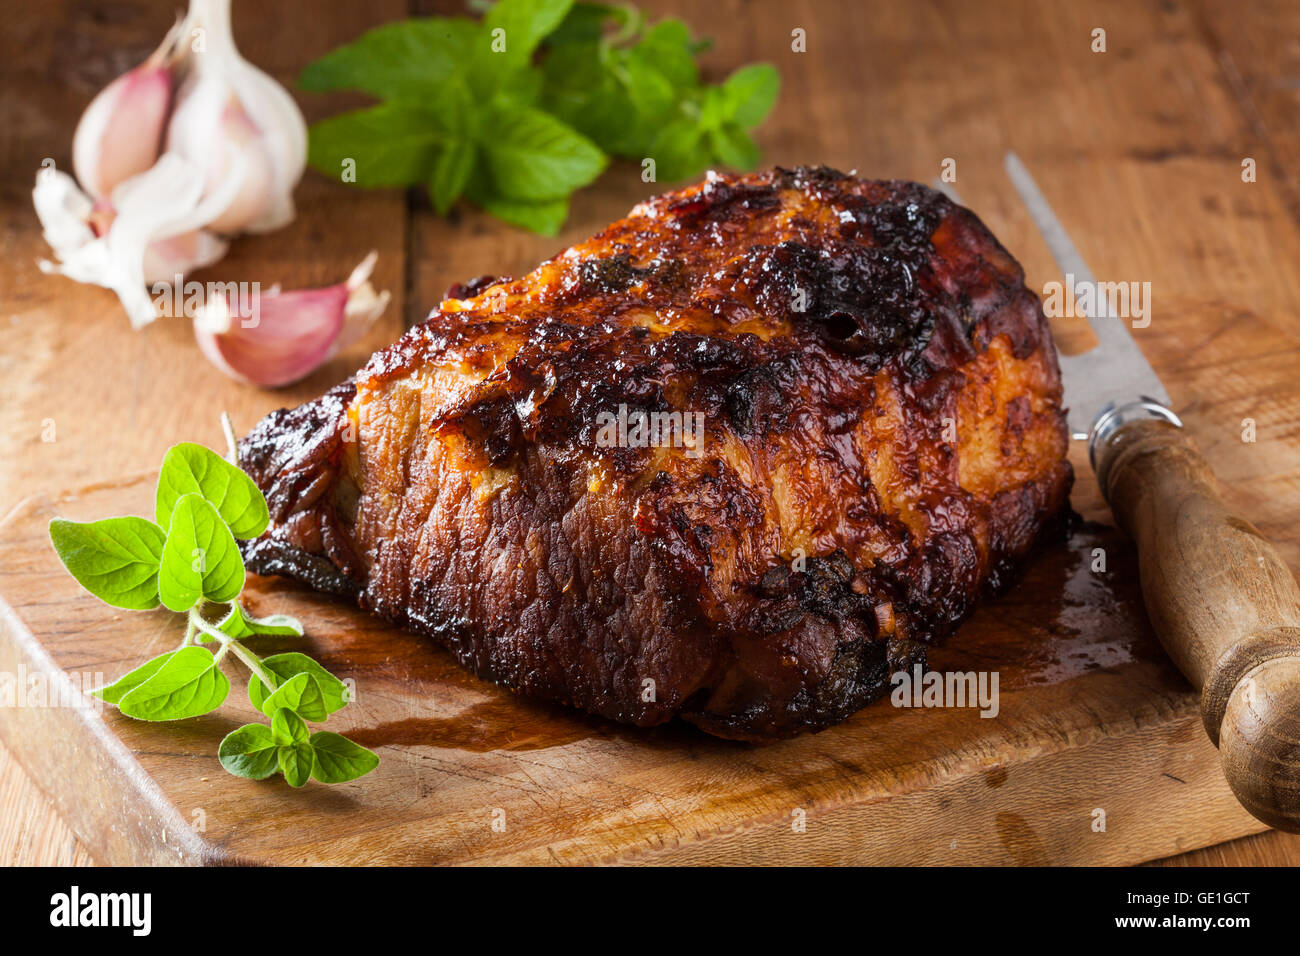 Oven roasted pork loin on a cutting board in a rustic kitchen. Stock Photo